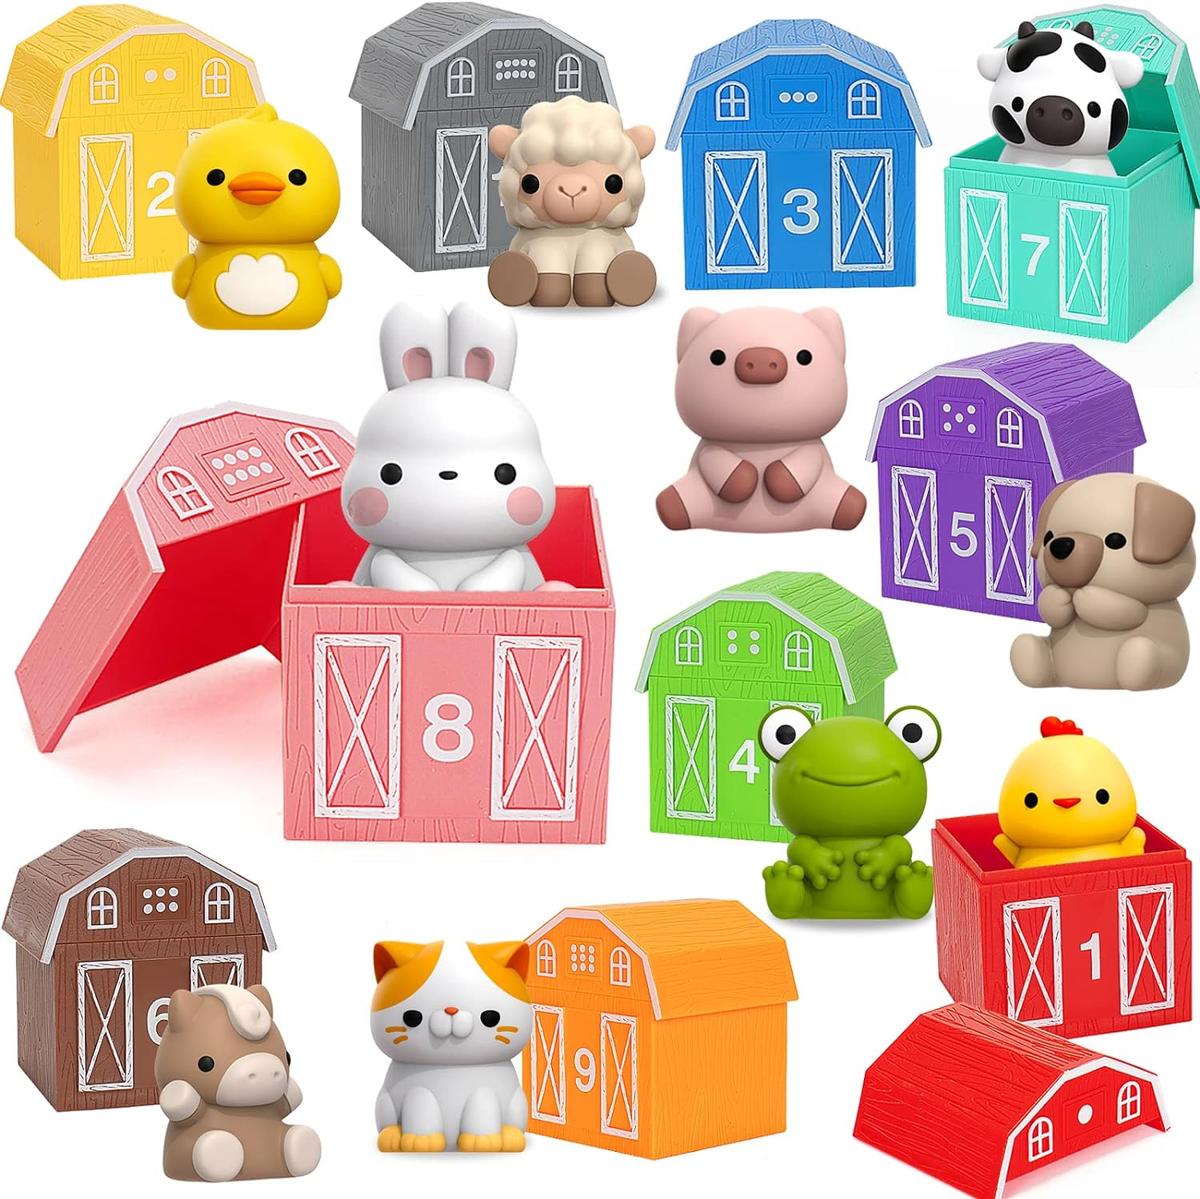 Learning Tos for 1,2,3 Year Old Toddlers, 20Pcs Farm Animals Toys Montessori Counting, Retail $35.00